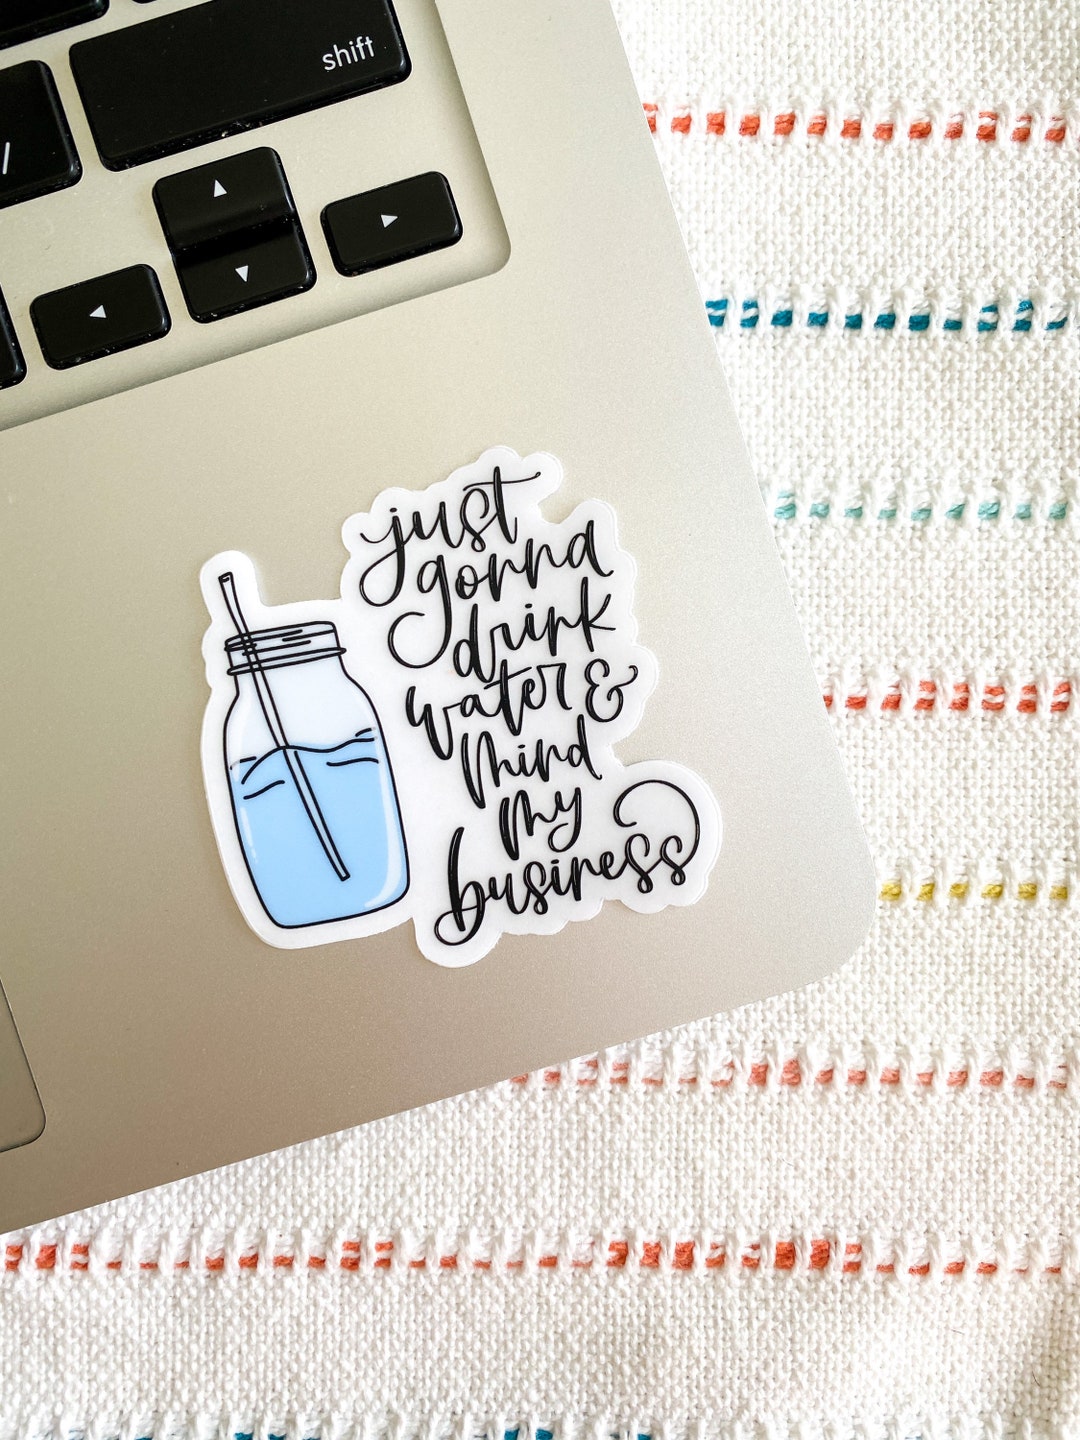 Taylor Swift Sticker Pack Waterproof Sticker for Laptop, Water Bottle,  Notebooks and More Bridesmaids Gifts 